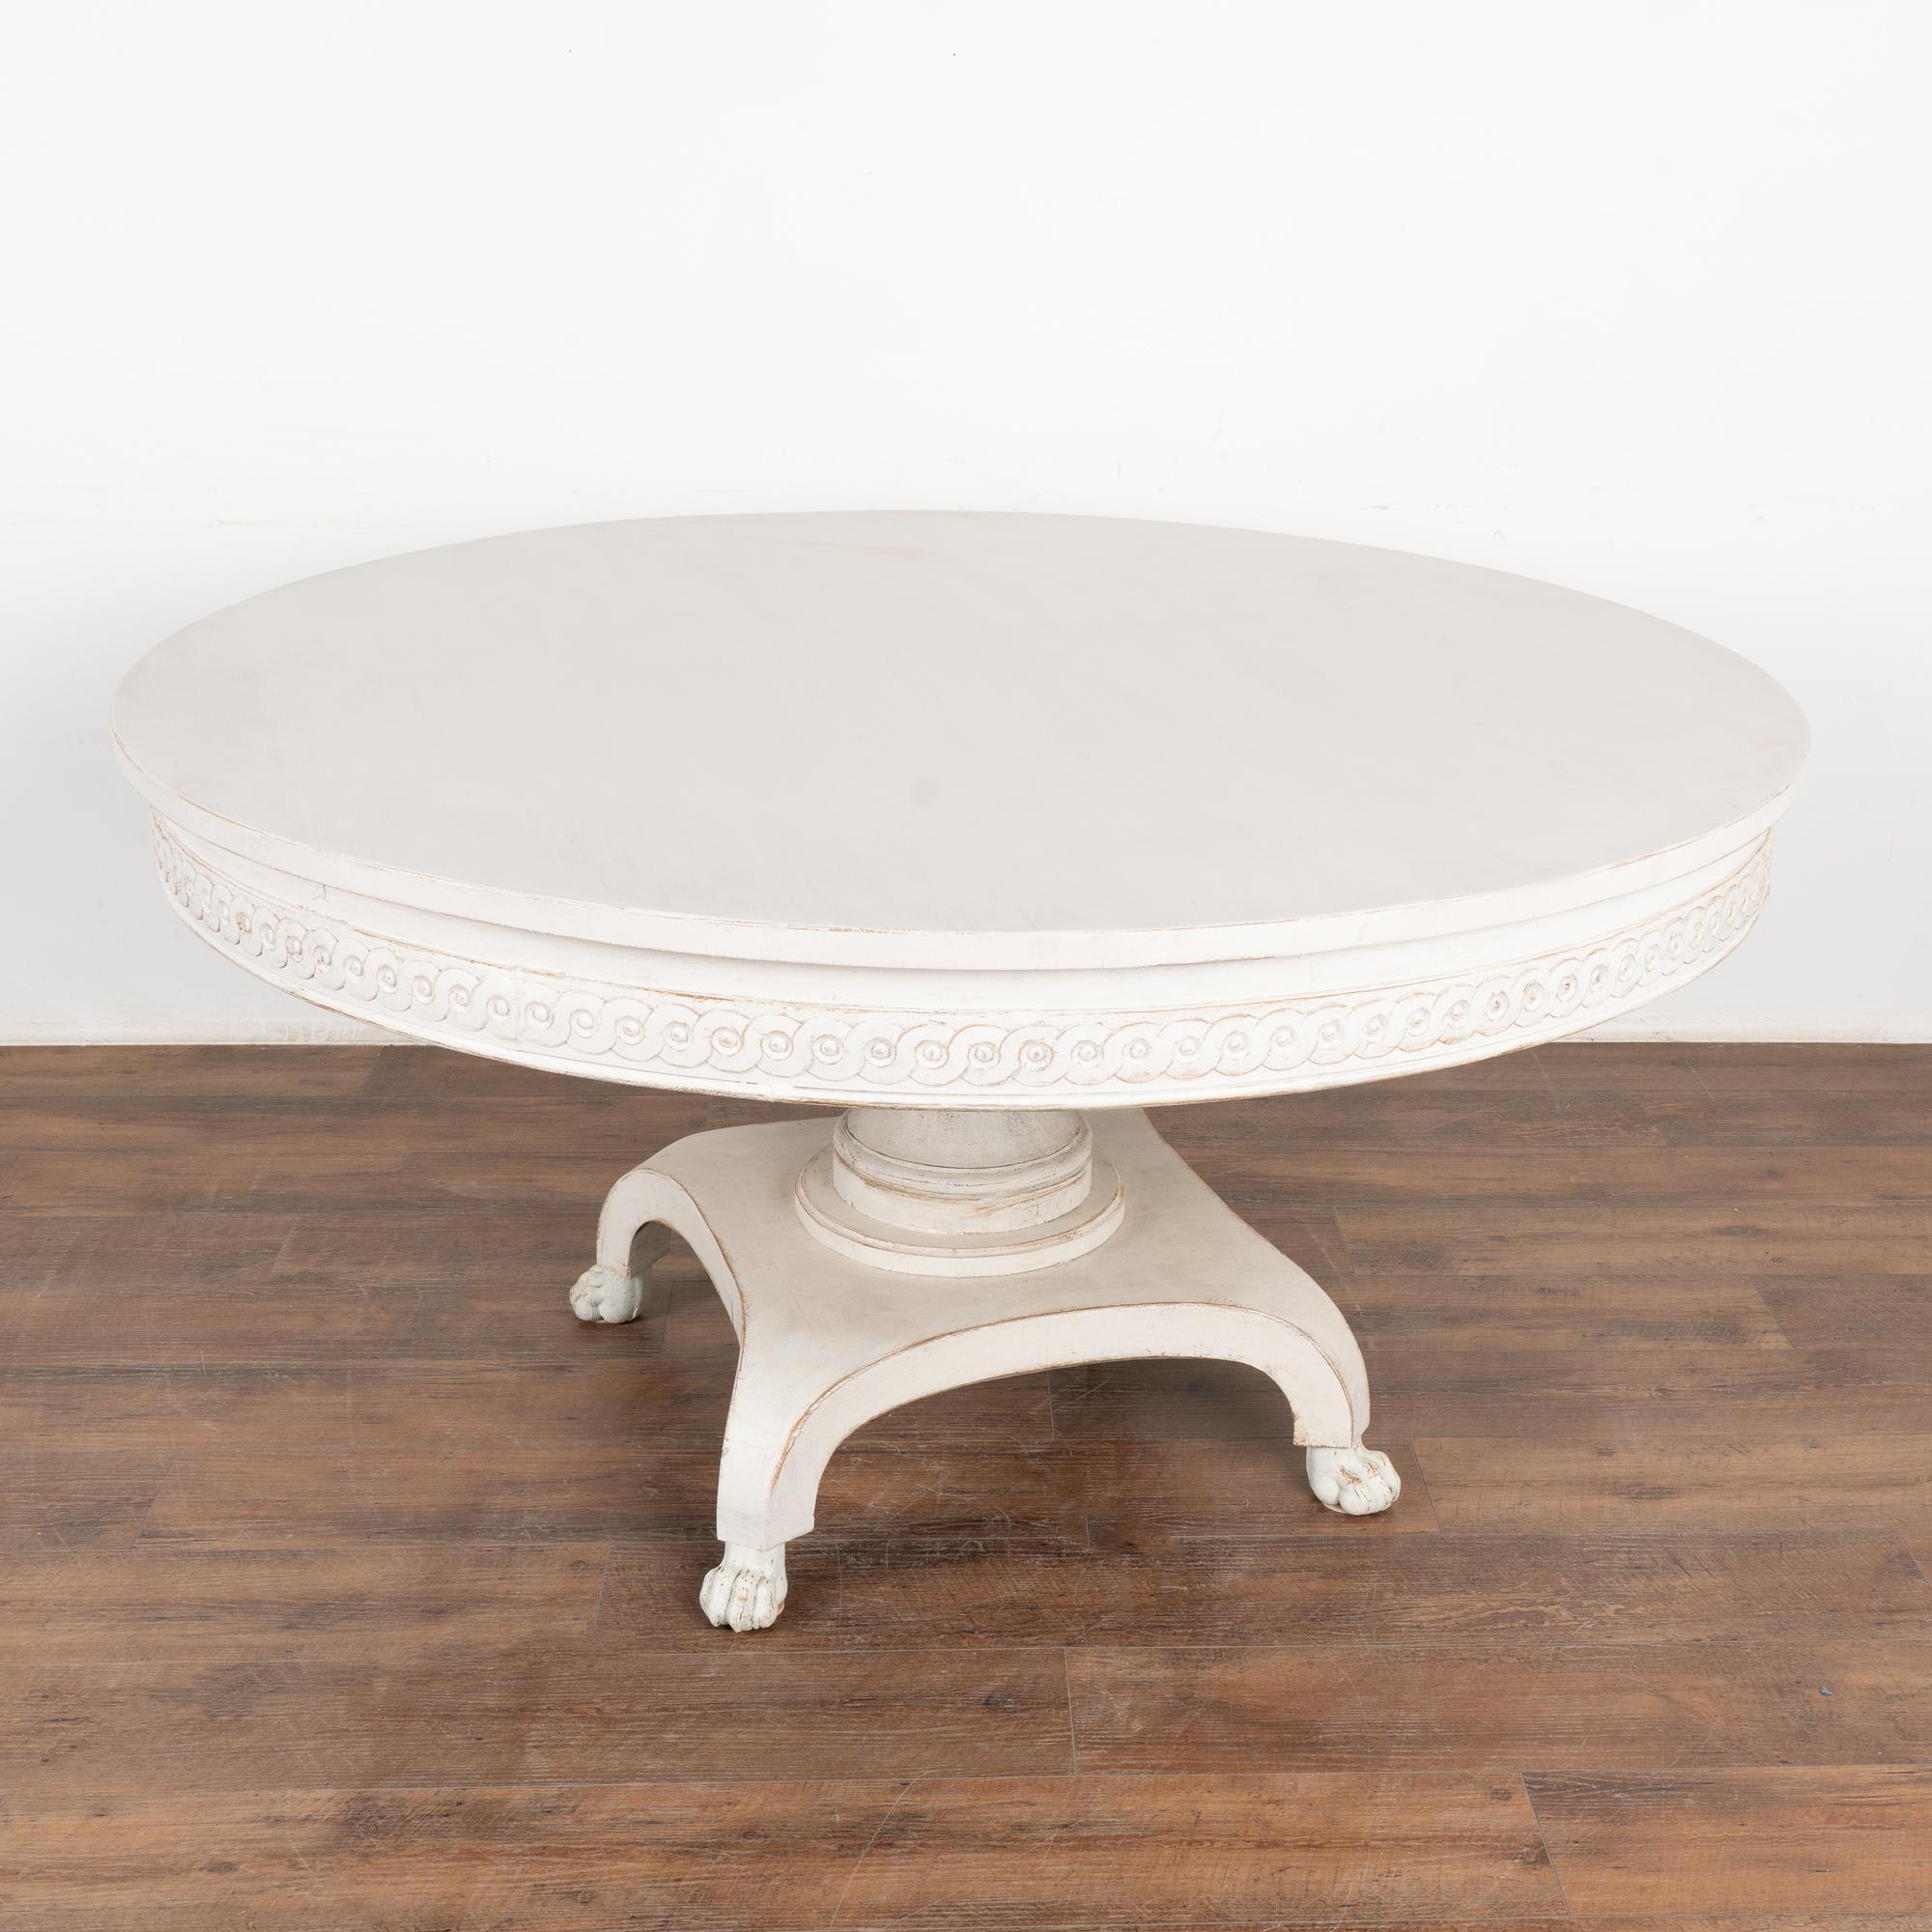 This large round pedestal 5' table has a decorative carved skirt and dramatic pedestal base resting on four carved lion's paw feet.
Restored, later professionally painted in white and lightly distressed to fit the age and grace of this impressive